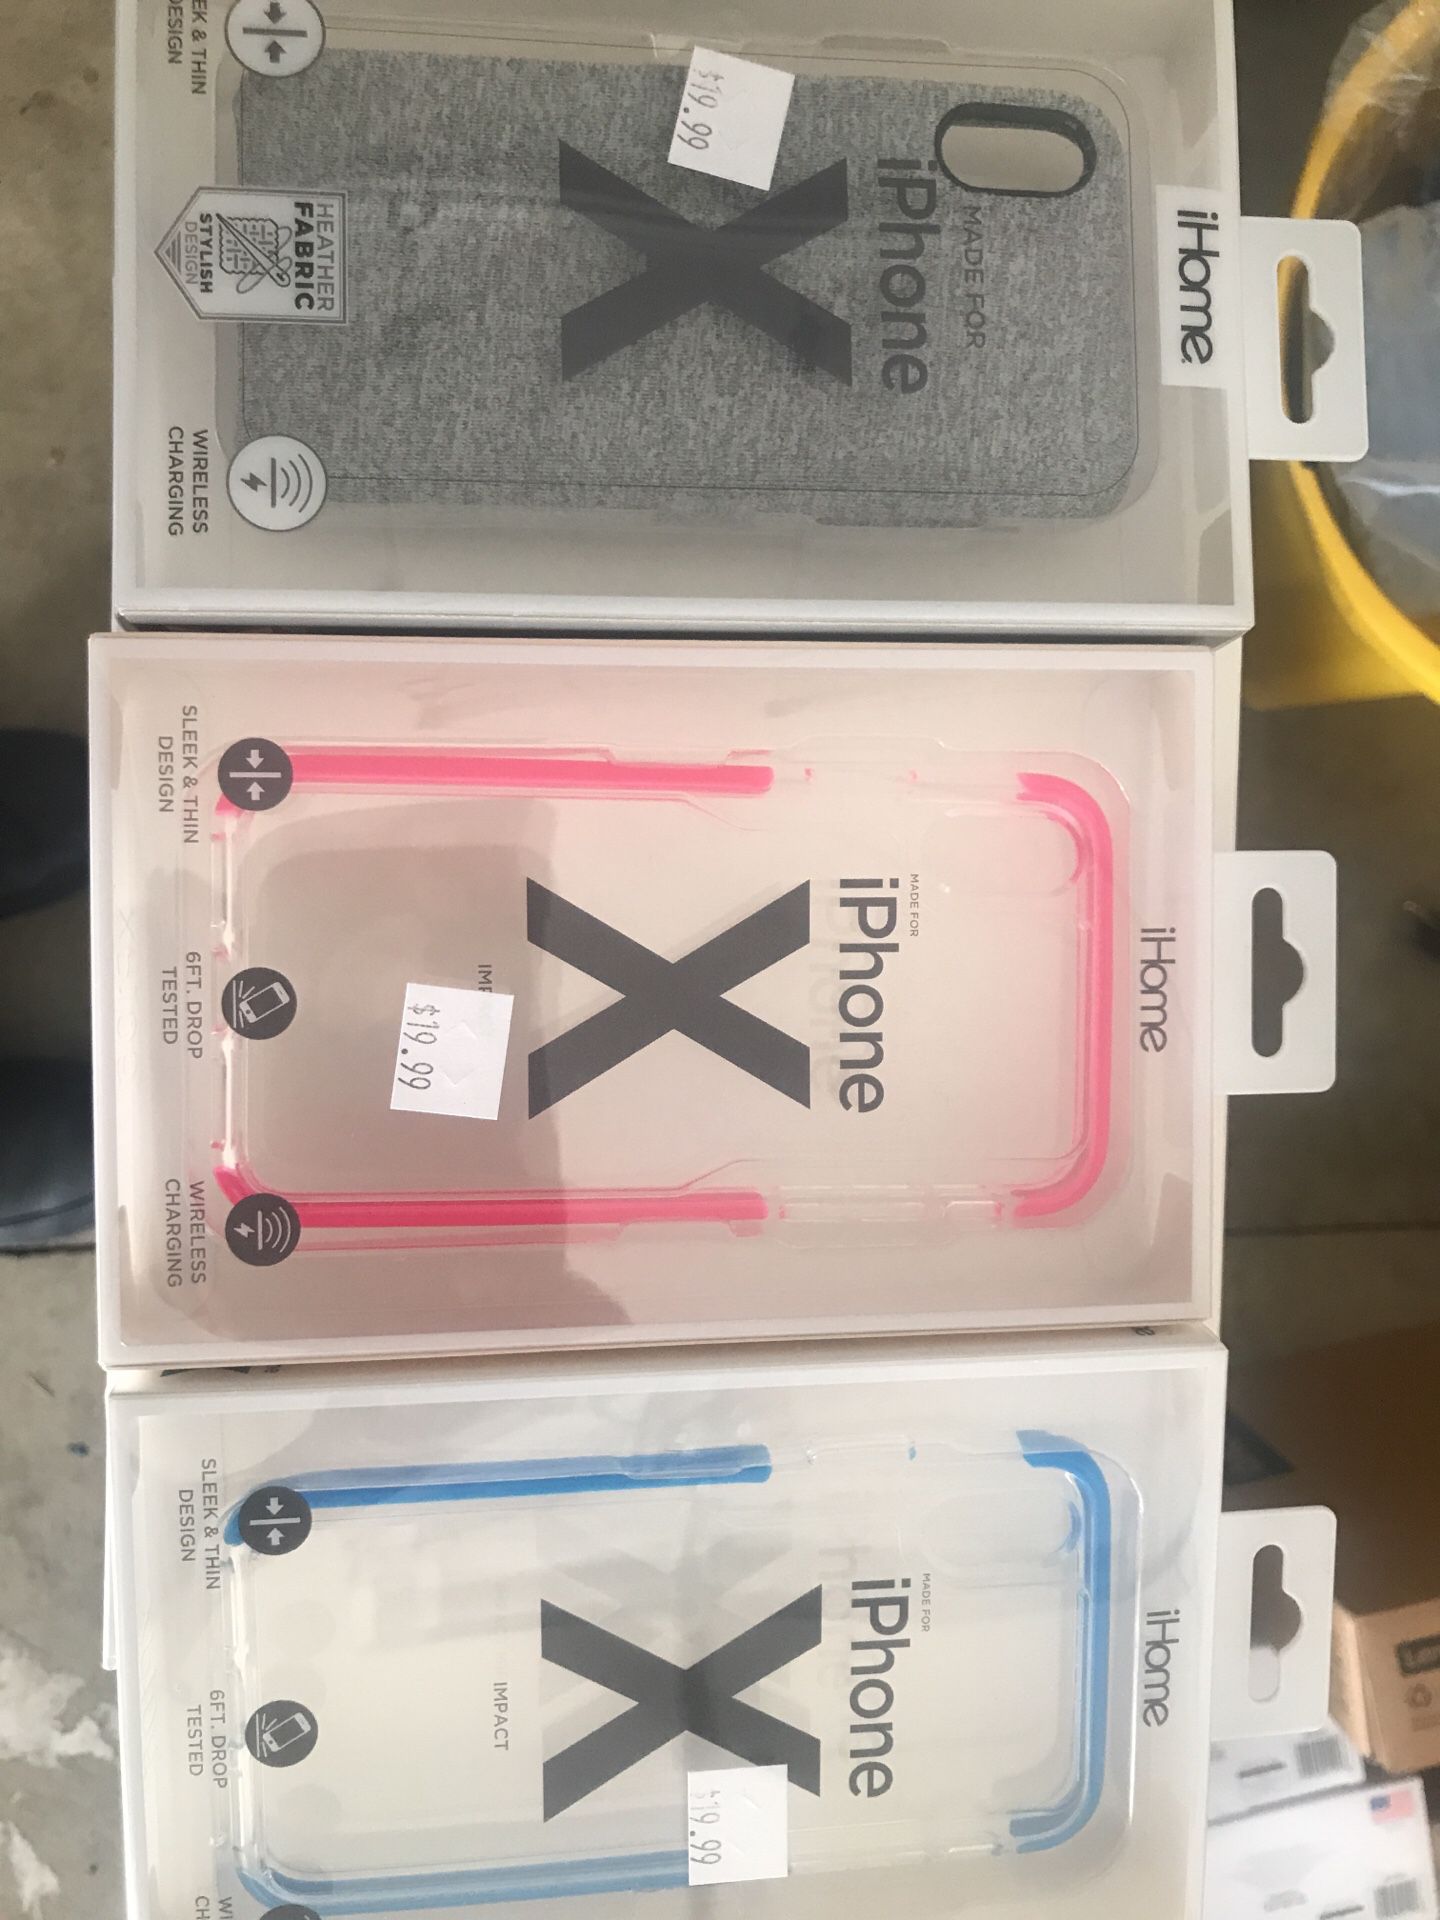 Brand new iPhone X cover